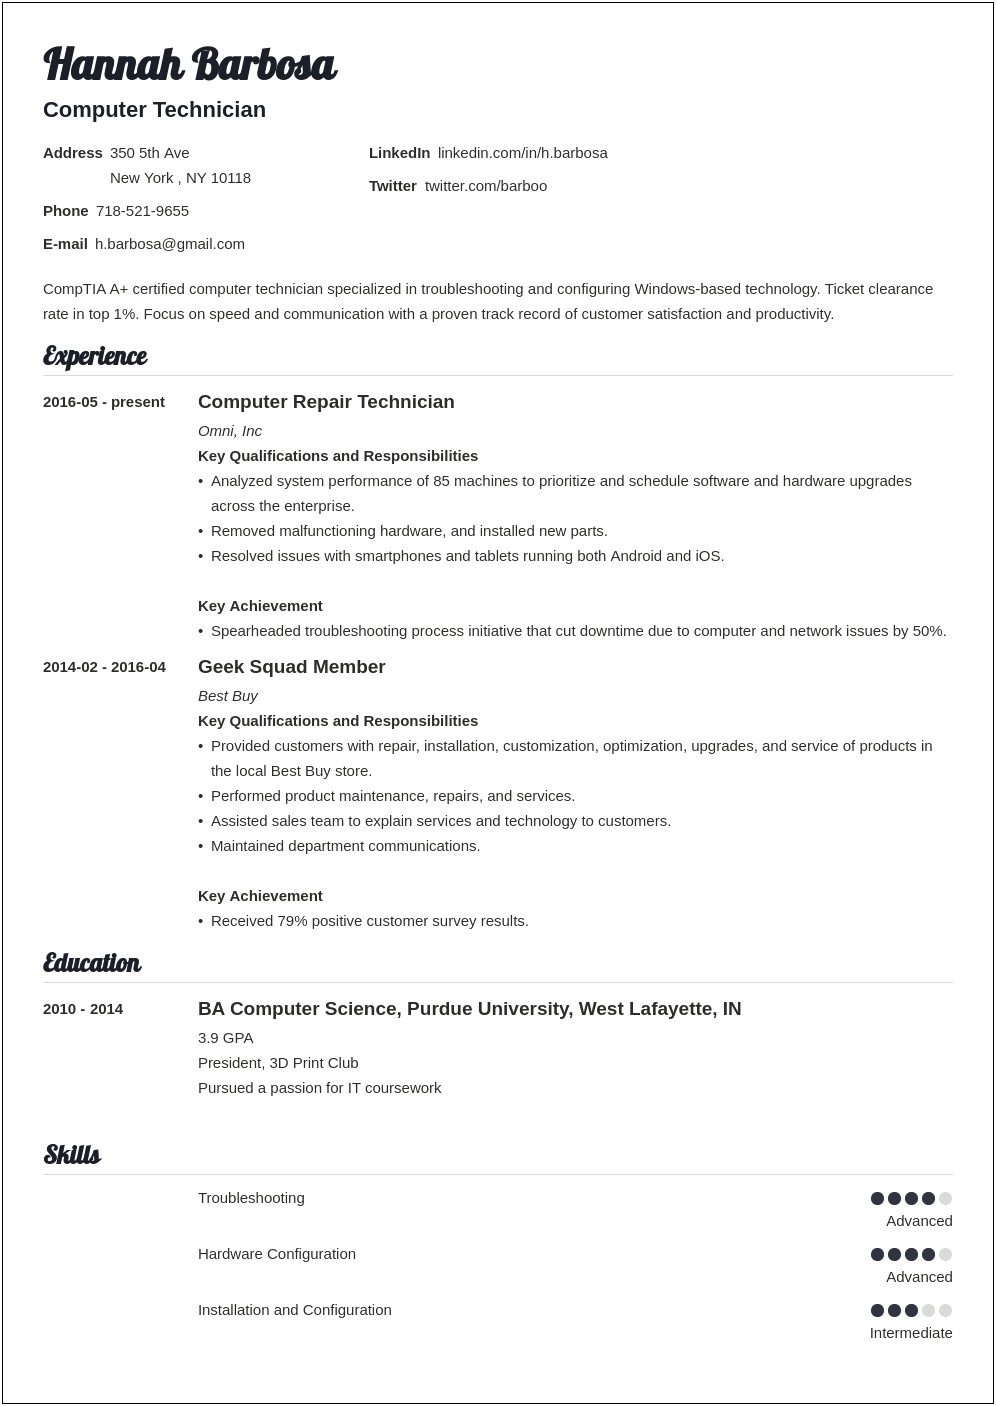 Resume Summary Examples For Computer Technicians